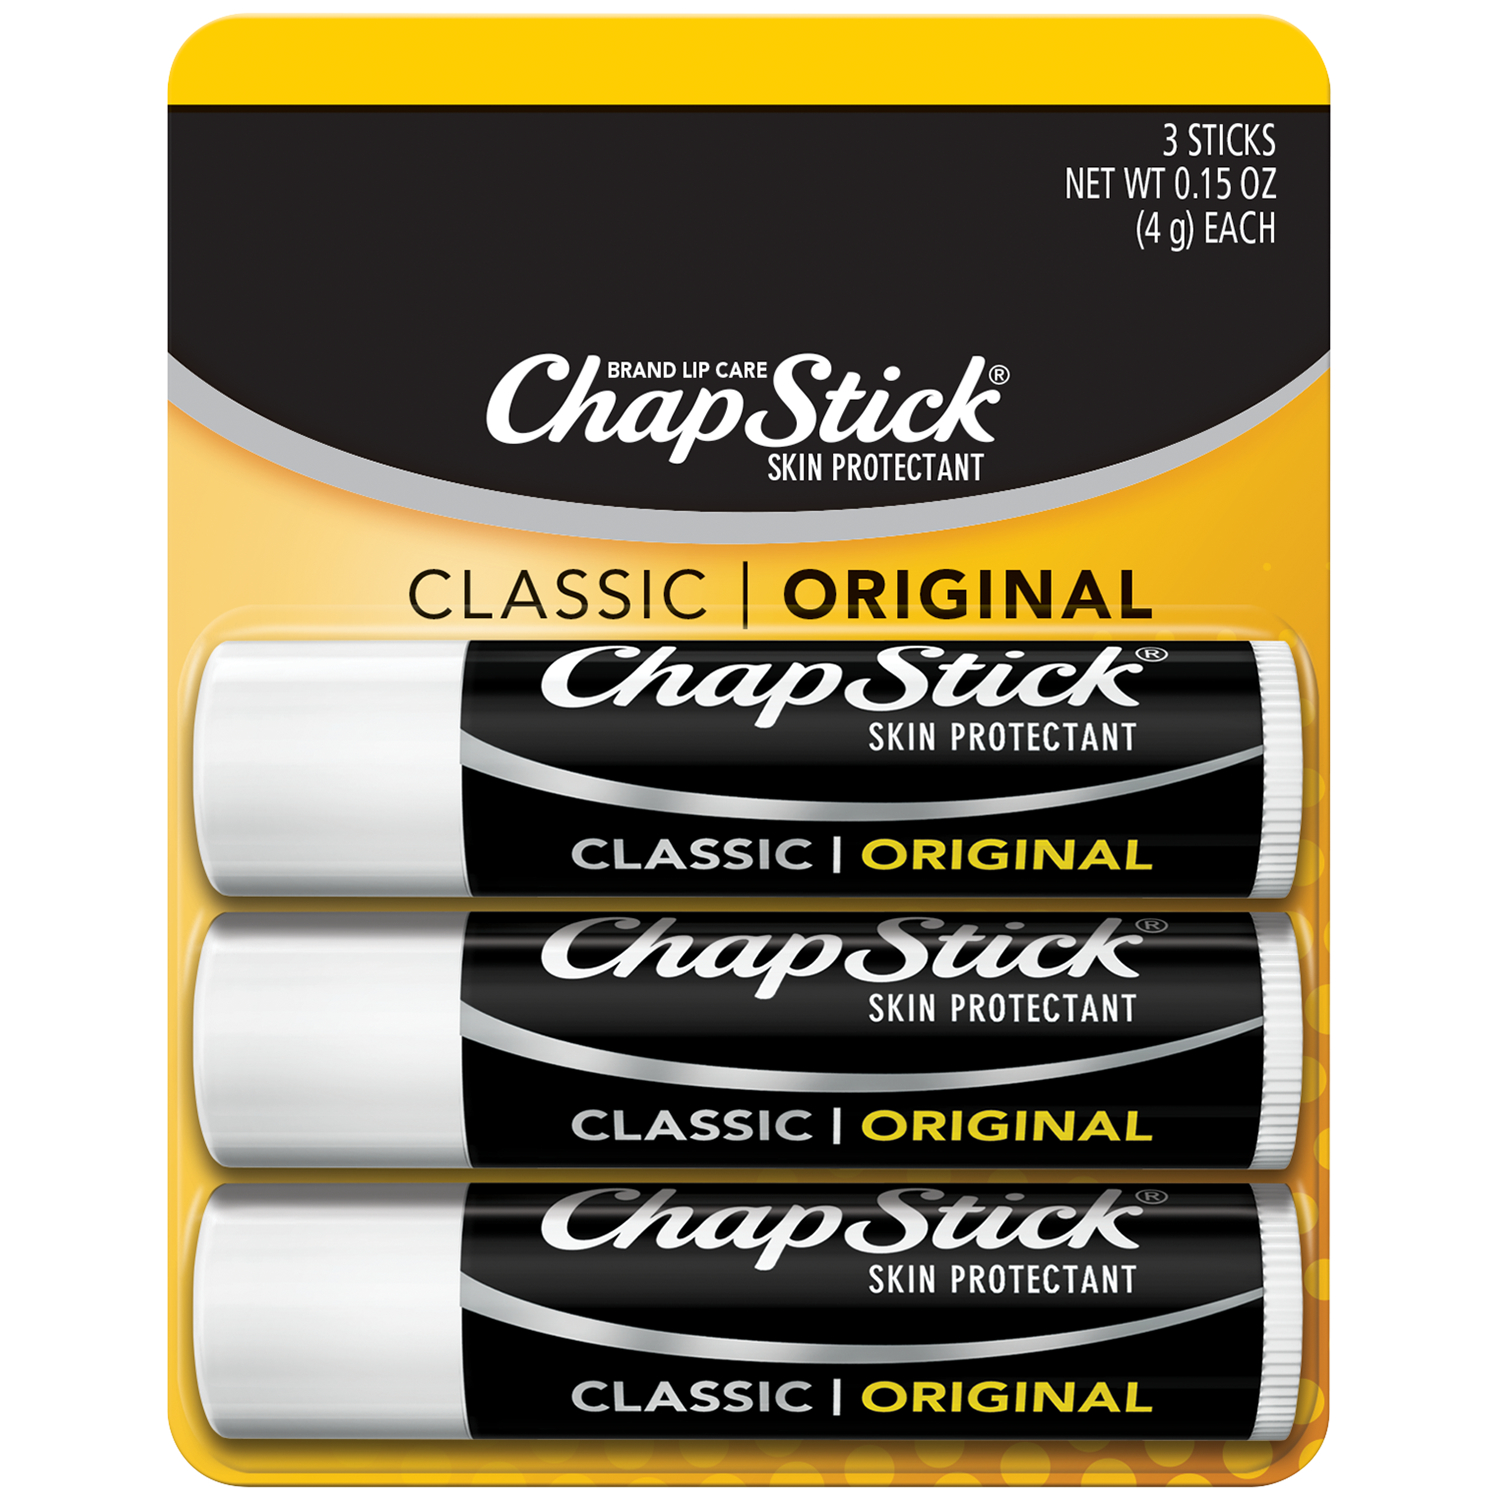 ChapStick  Classic Skin Protectant Flavored Lip Balm Tube, 0.15 Ounce Each (Original Flavor, 1 Blister Pack of 3 Sticks)